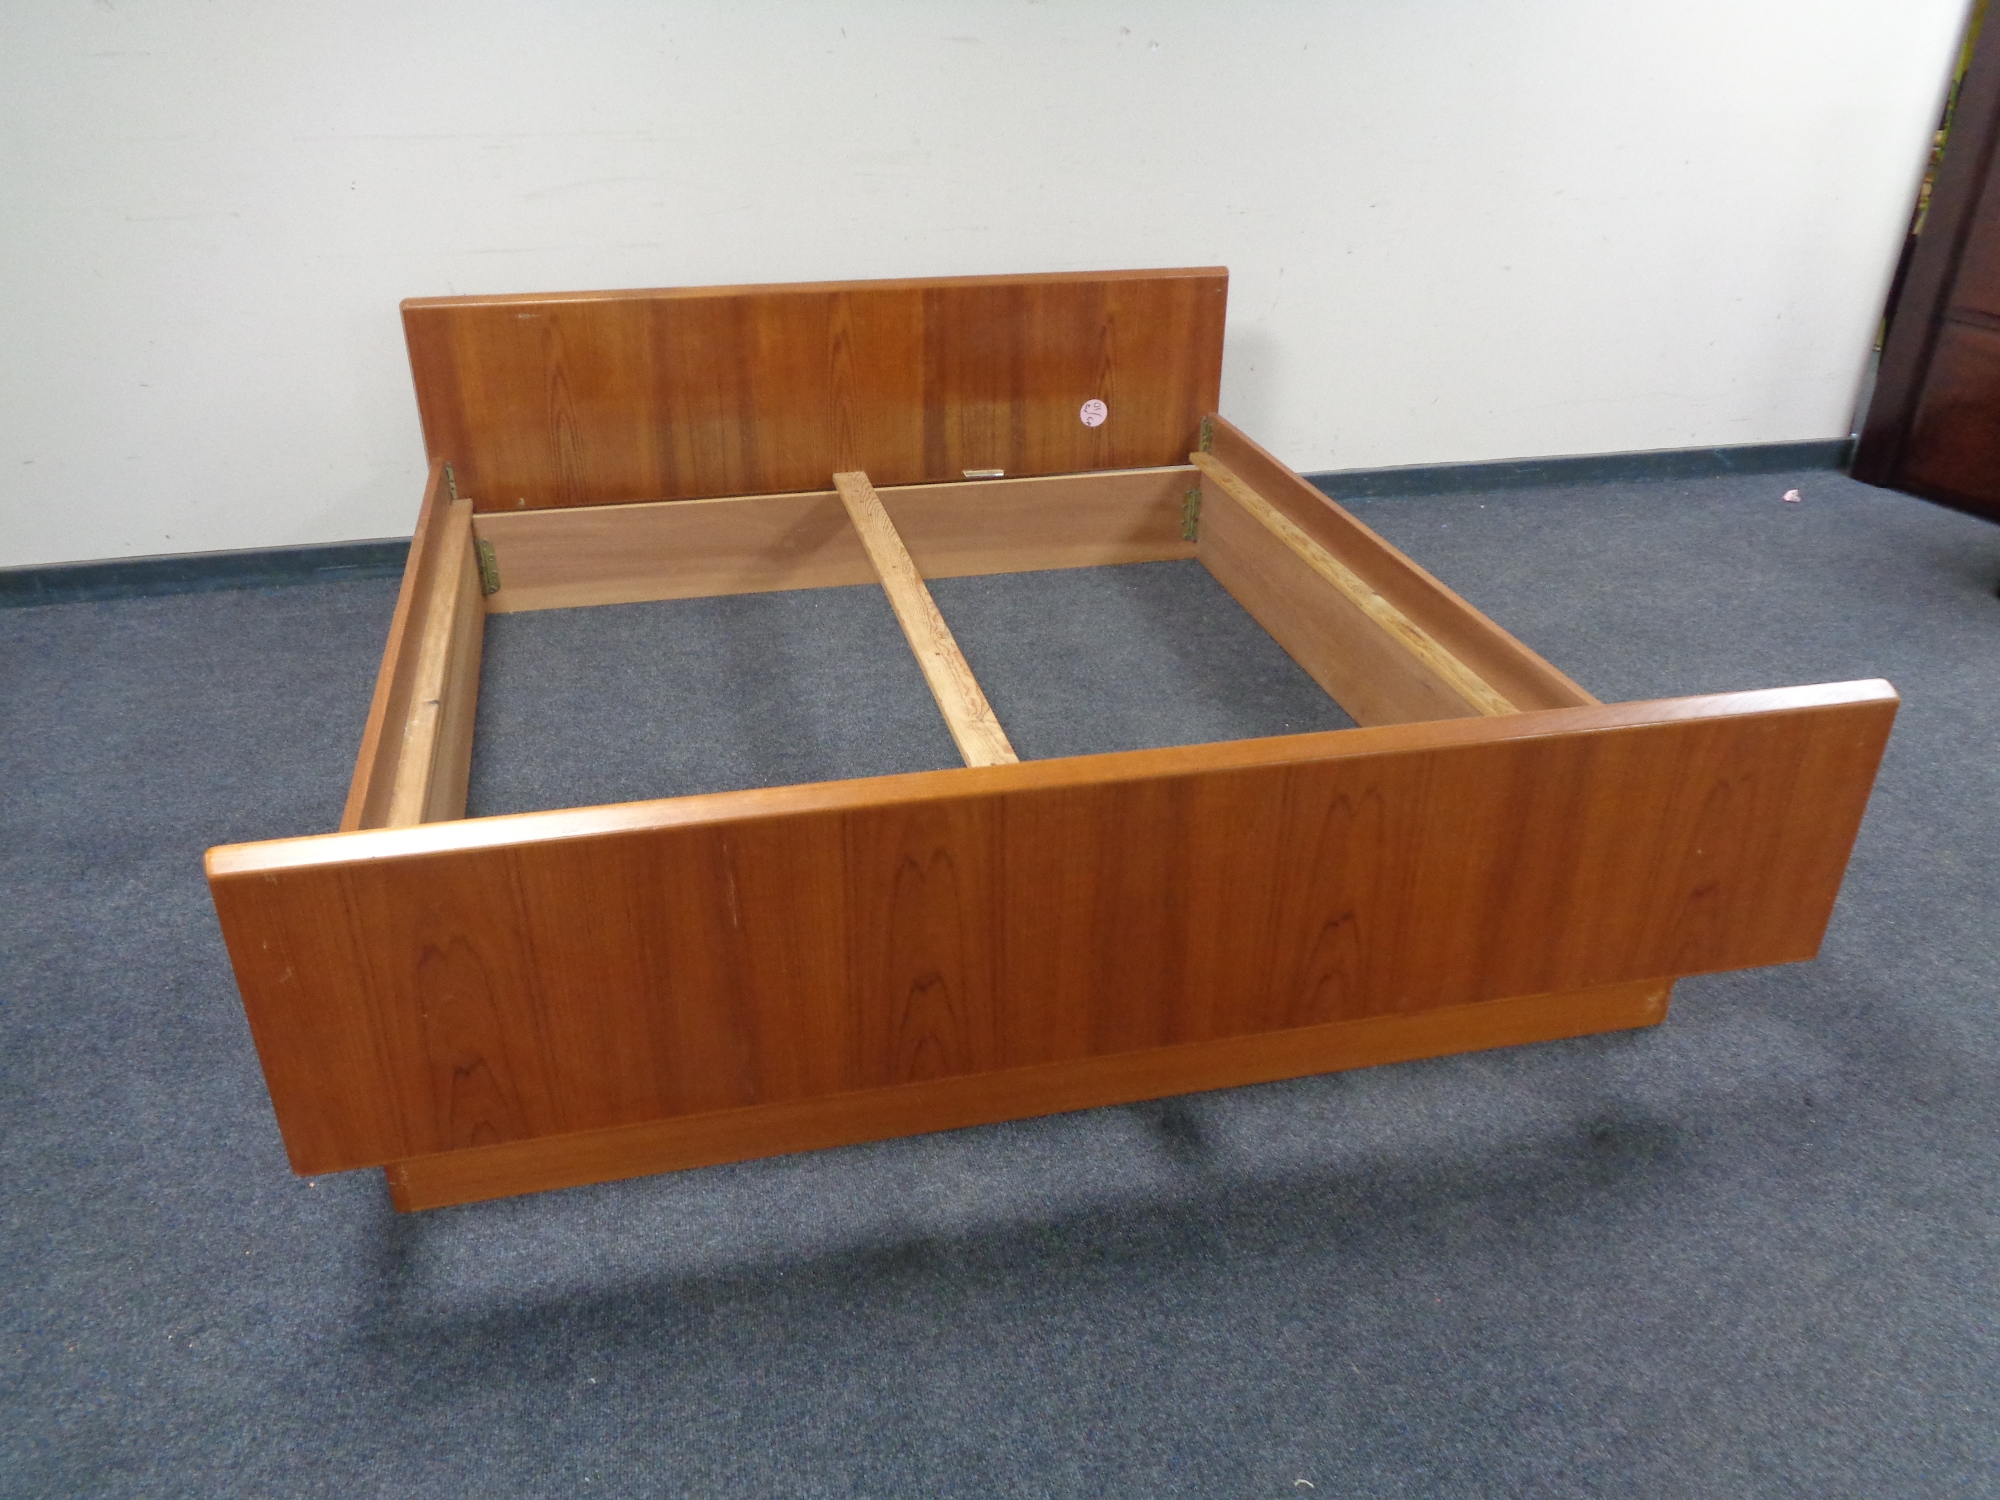 A mid 20th century teak 6' bed frame